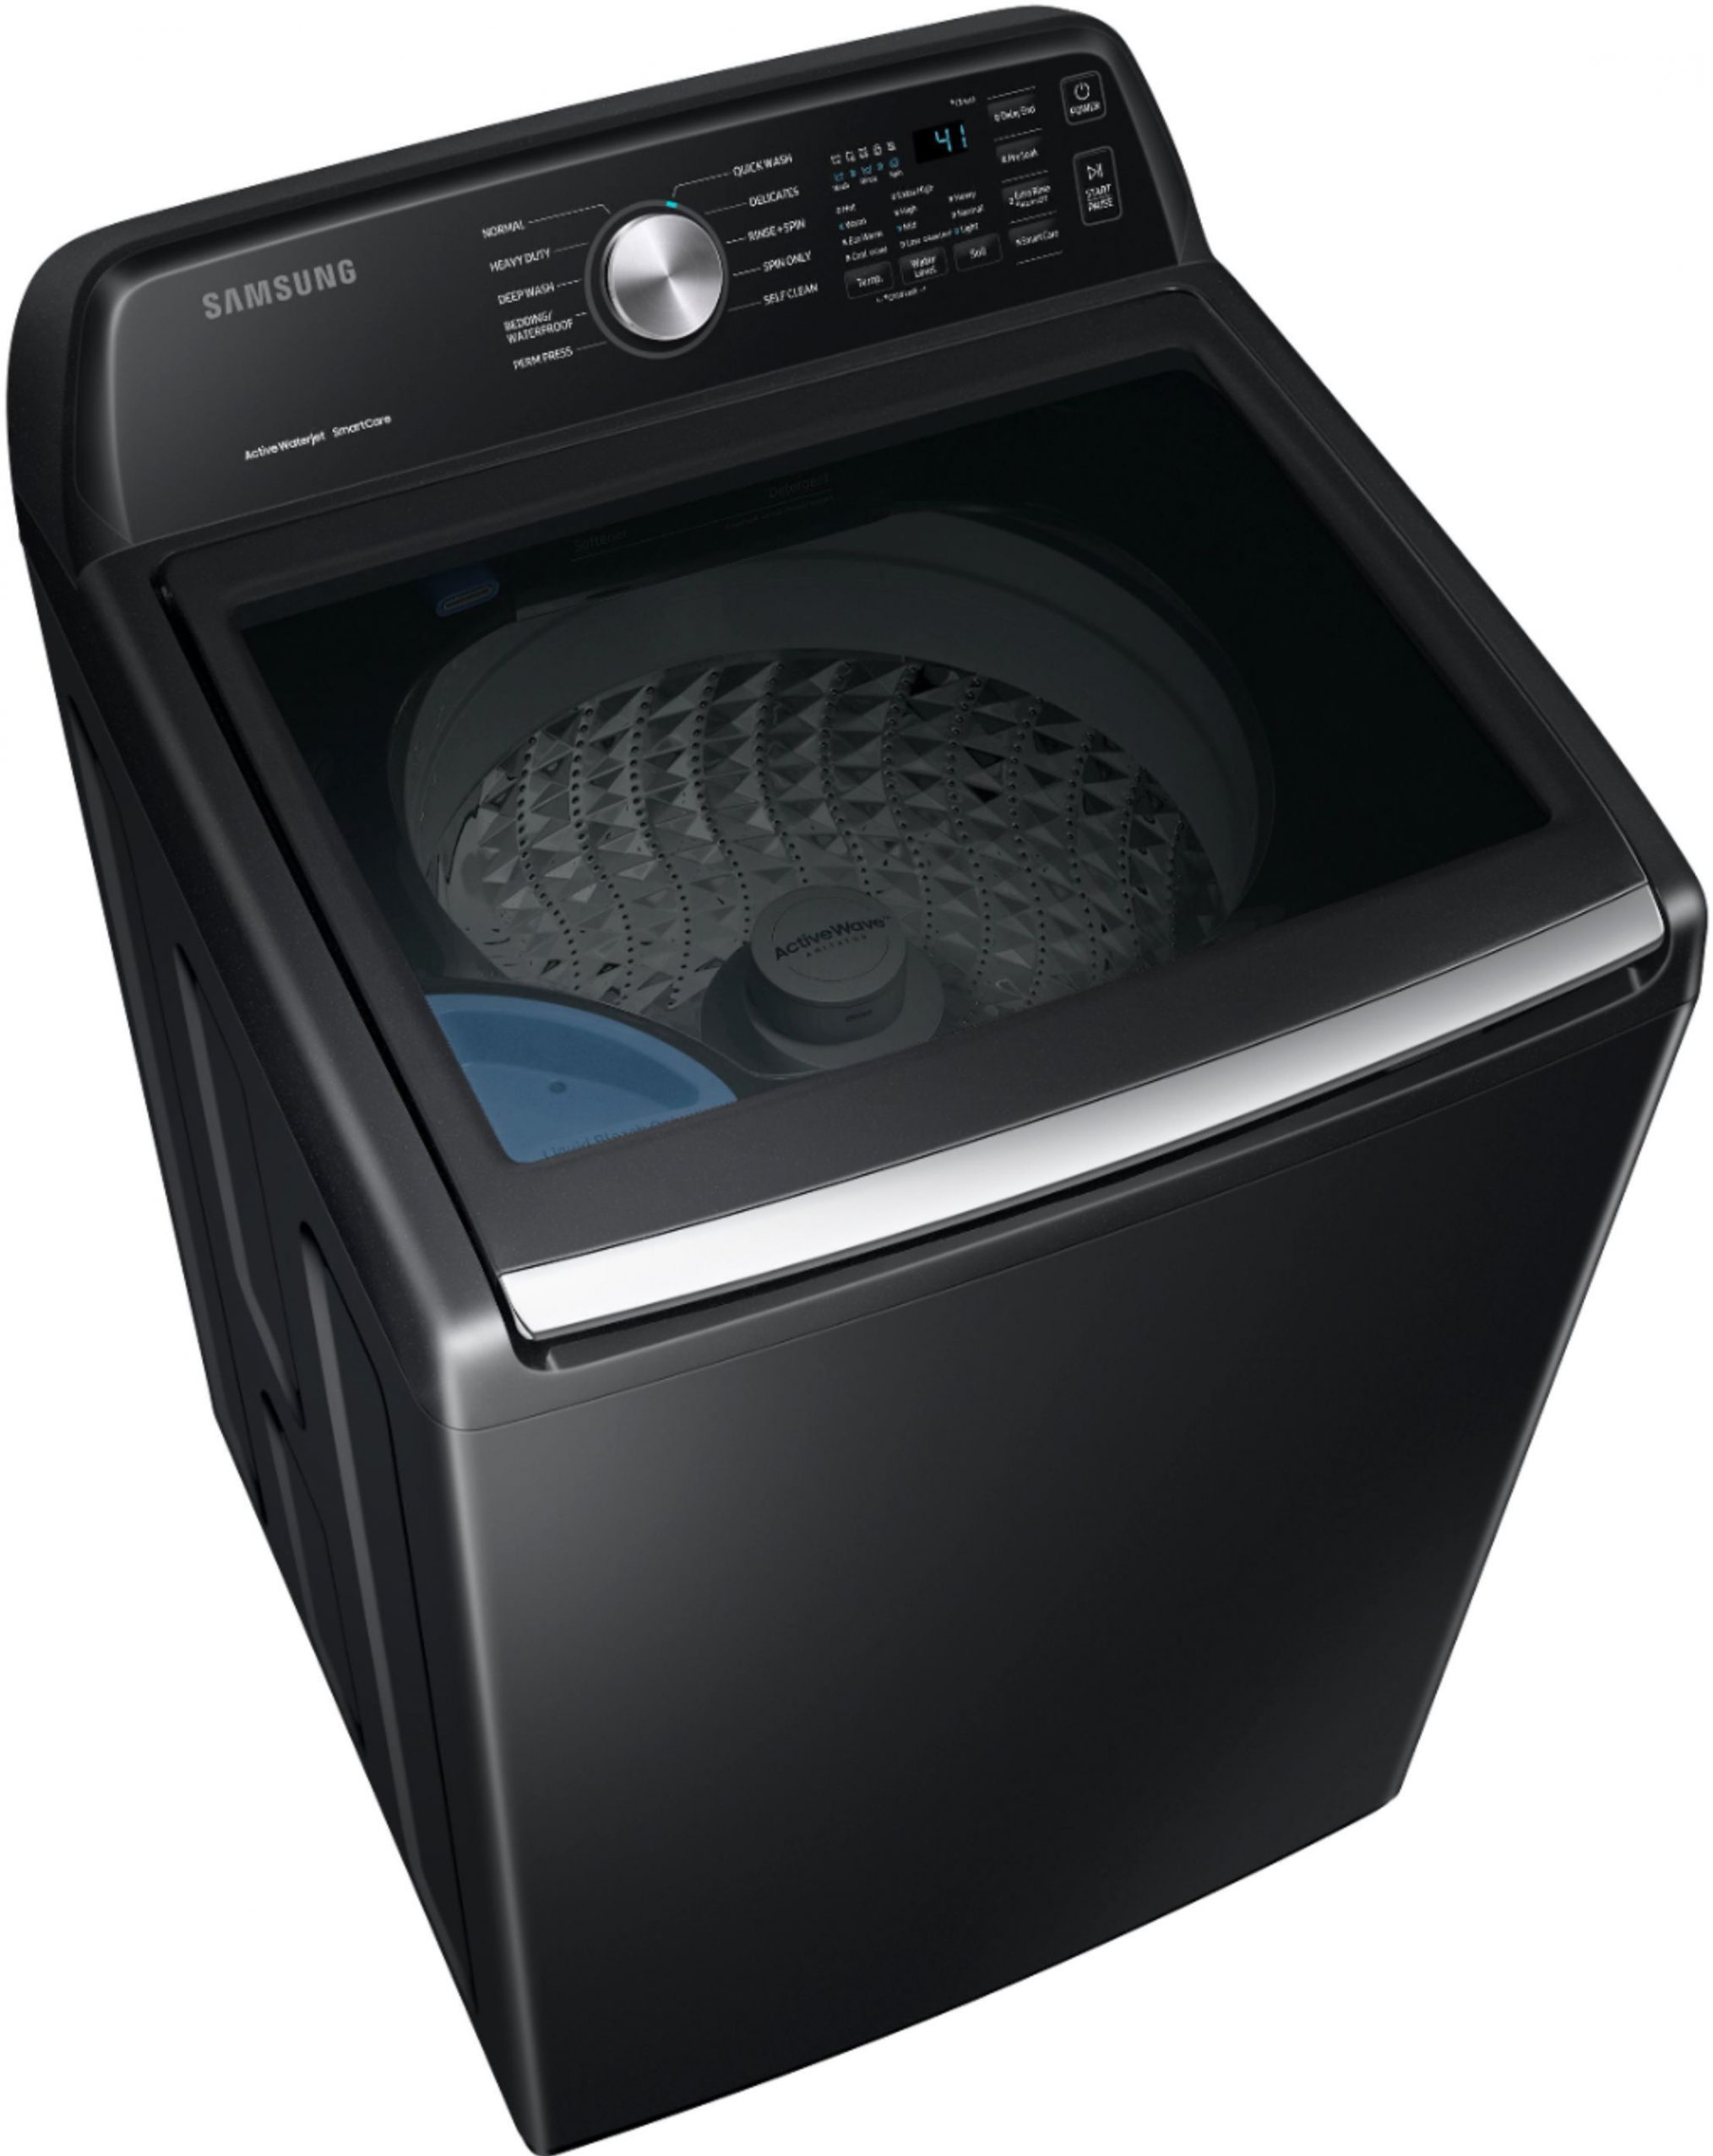 Samsung 4.4 cu. ft. High-Efficiency Top Load Washer